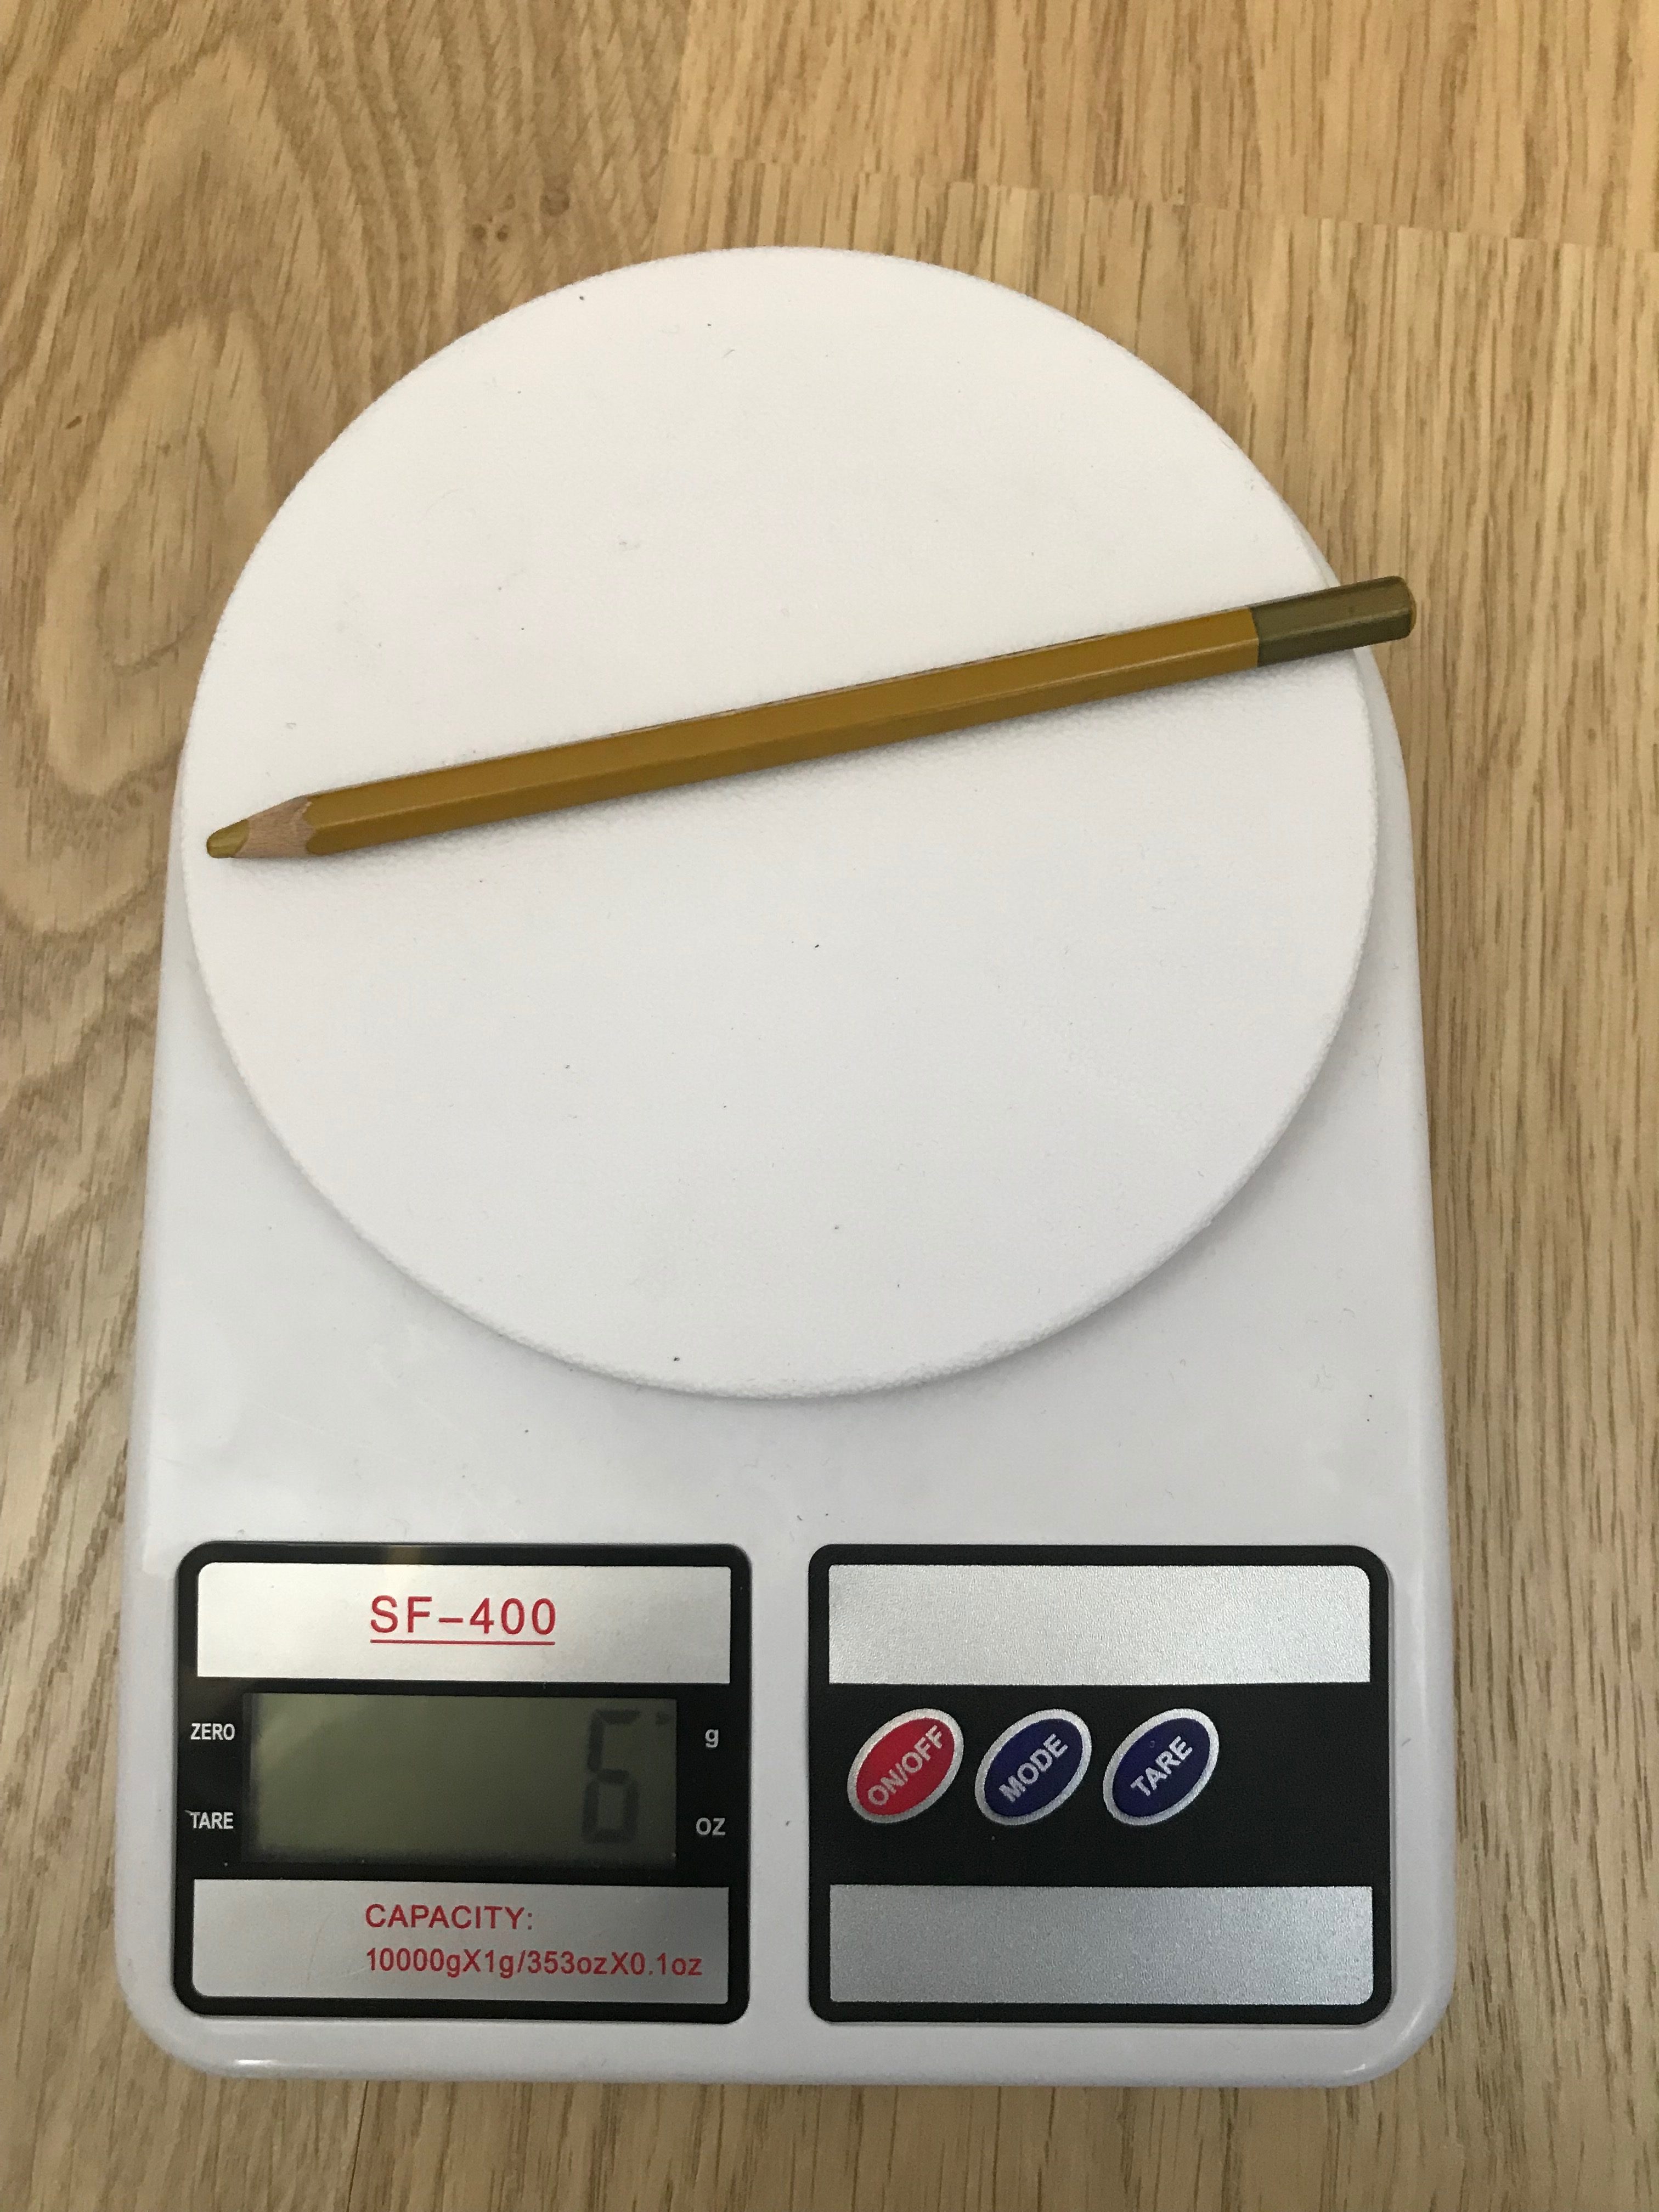 How much does a pencil weigh?